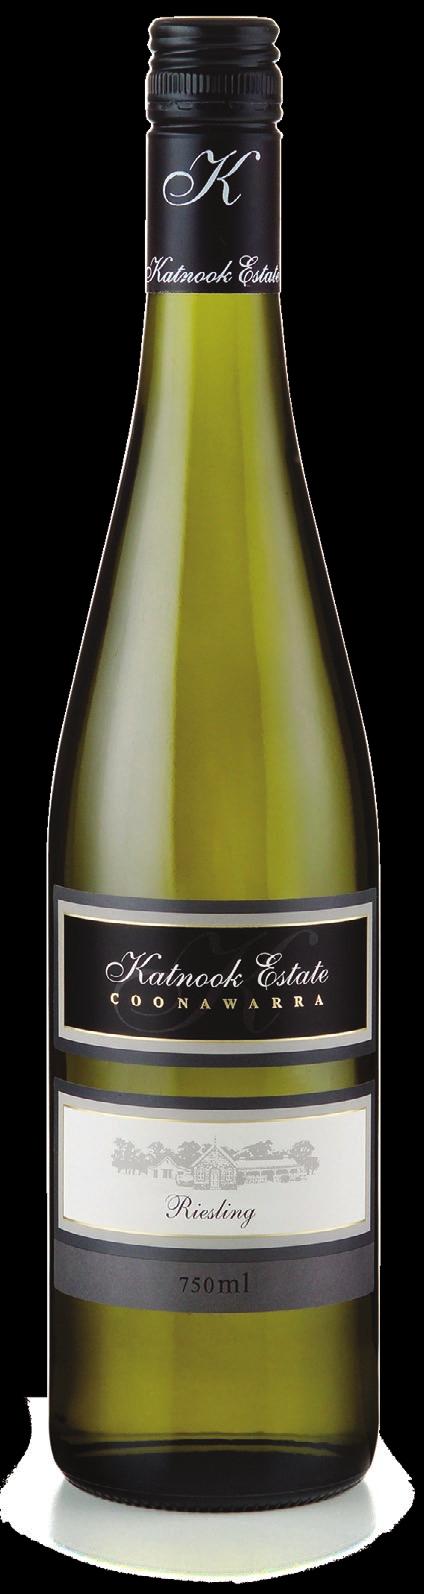 Katnook Estate Coonawarra Riesling 2008 The Katnook Estate range of premium quality, single varietal wines are an expression of the classic and unique characteristics of the Coonawarra wine region.